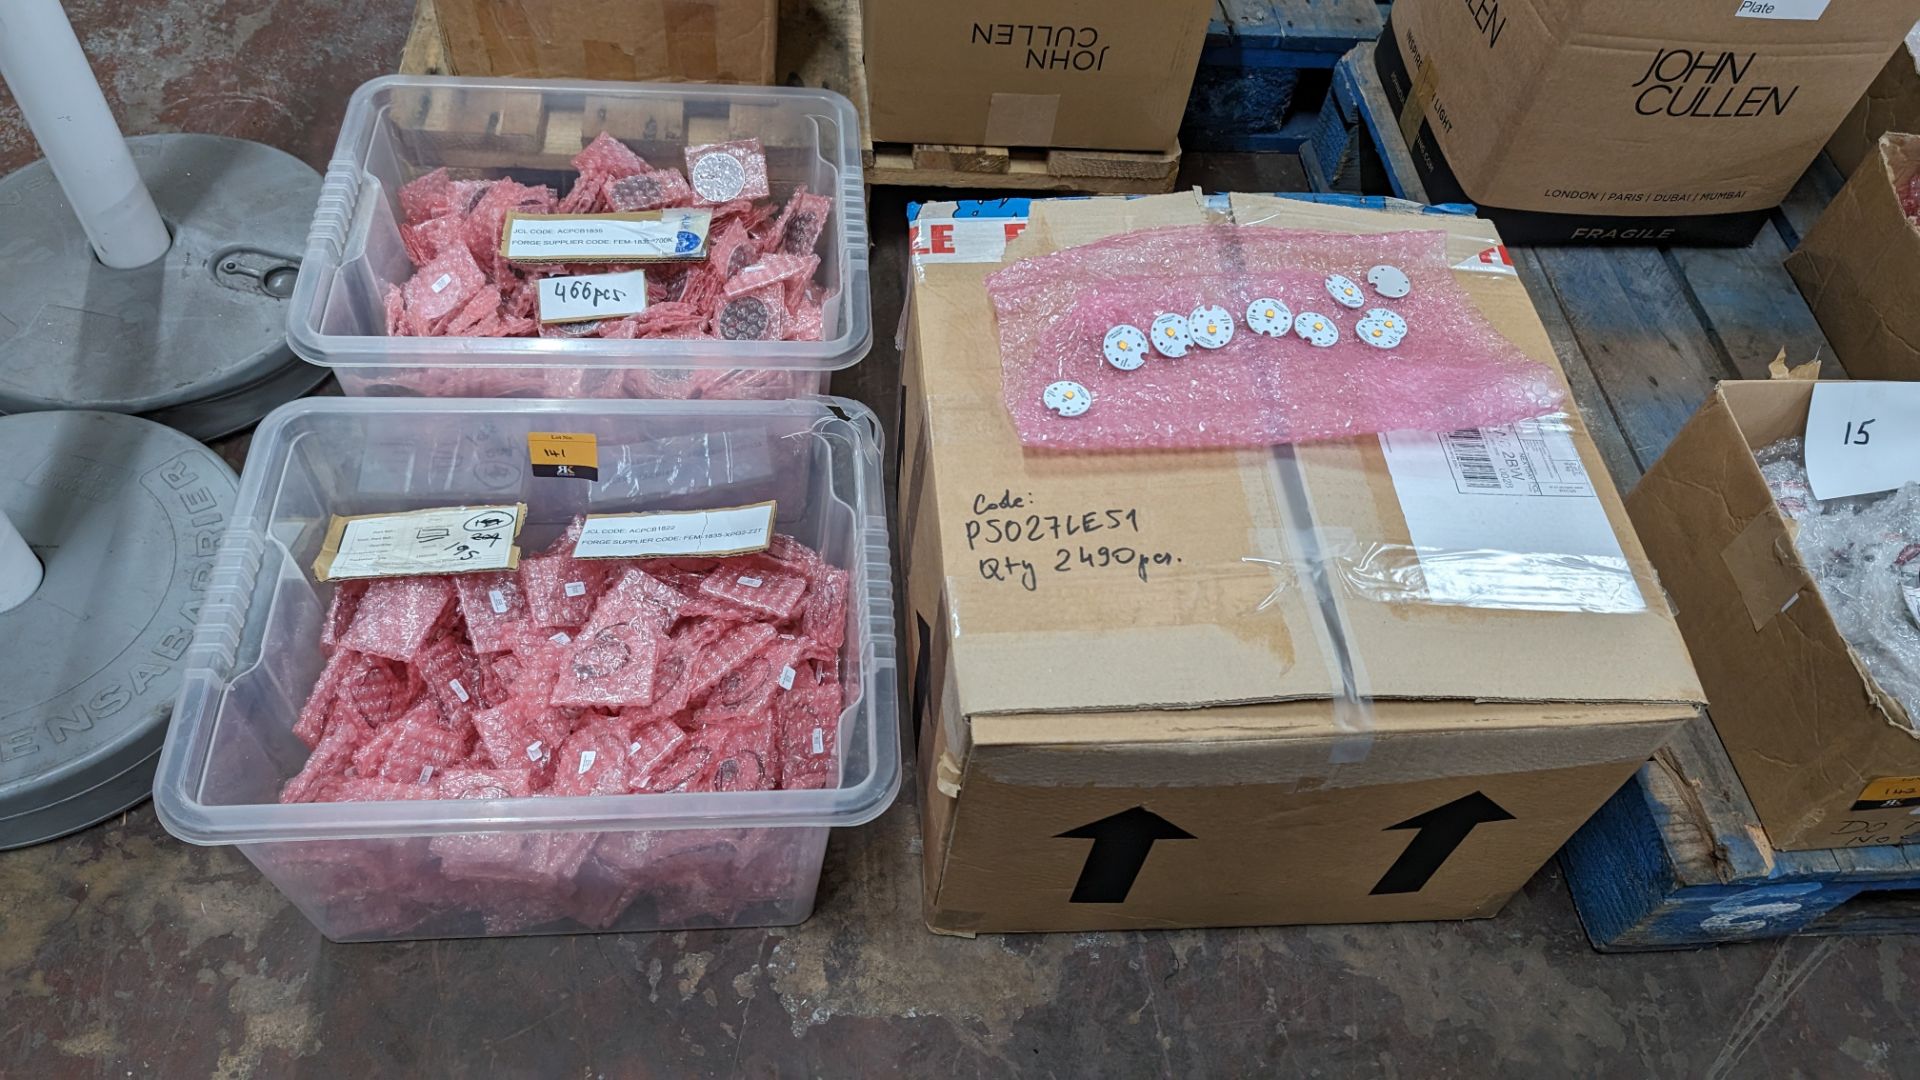 The contents of 3 boxes/crates of LED components